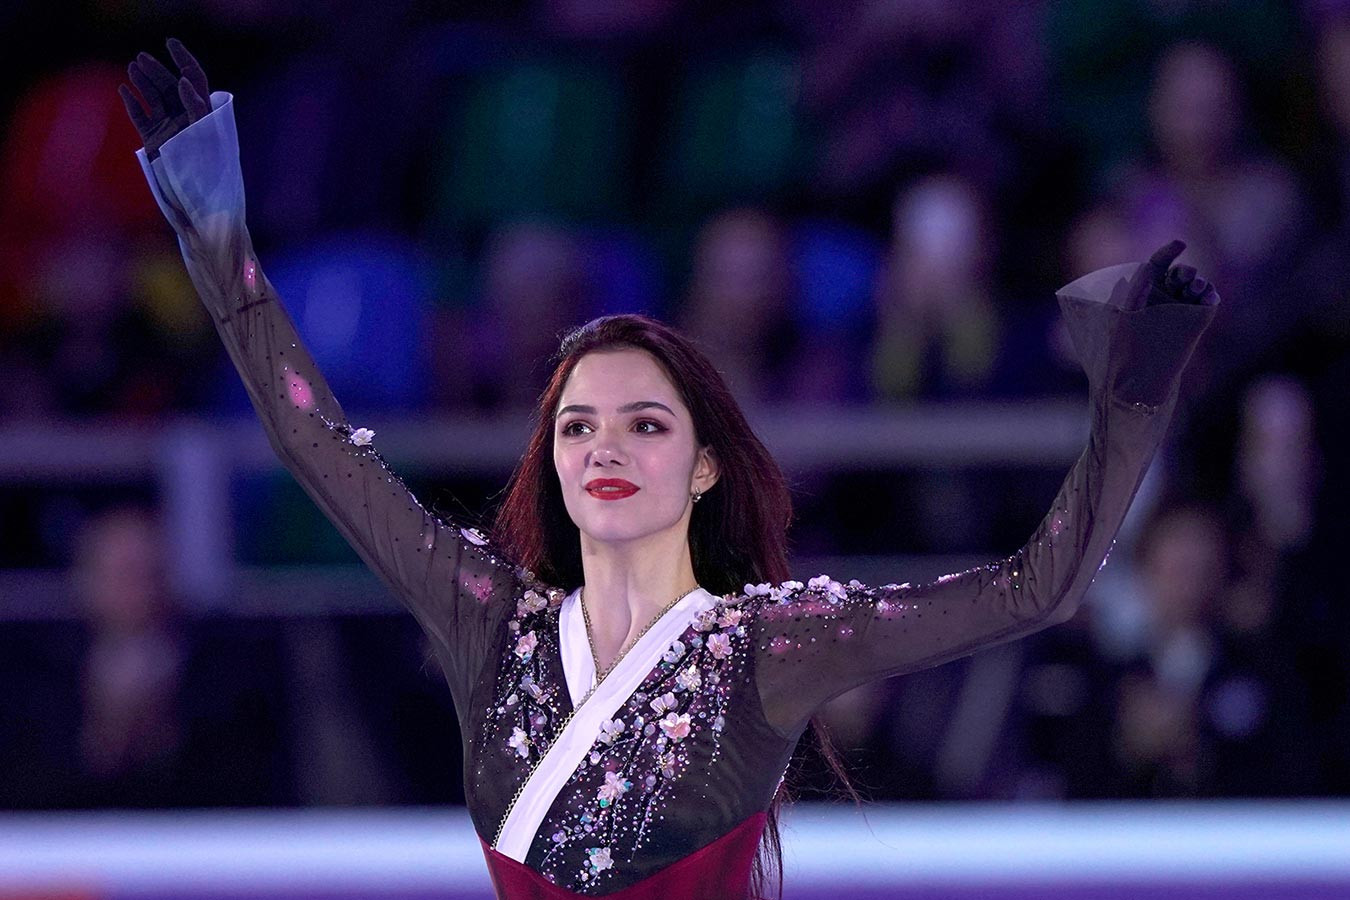 Evgenia Medvedeva spoke about her relationship with Dania Milokhin after the Ice Age show